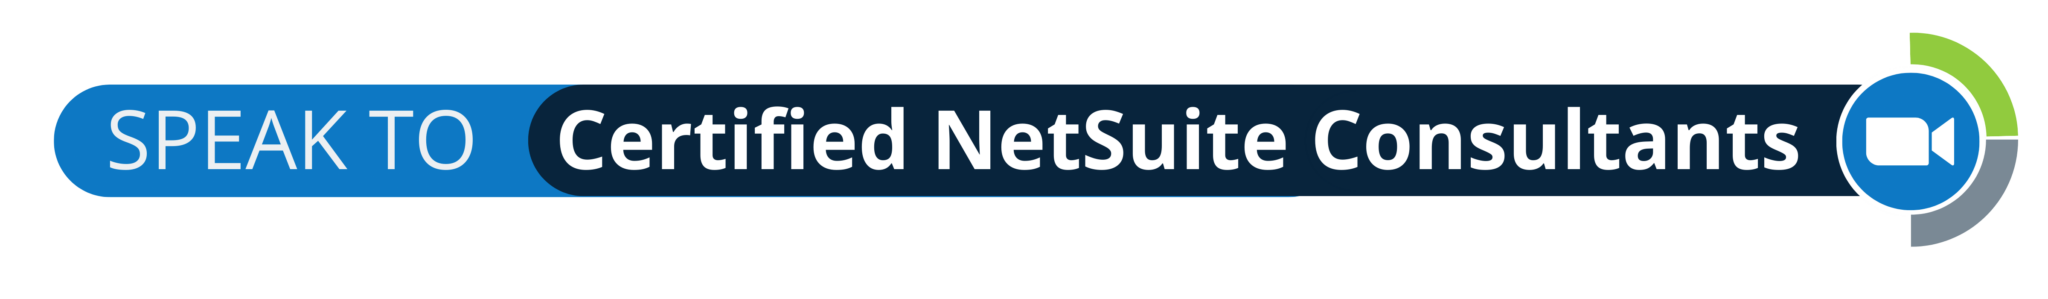 Work-with-Certified-NetSuite-Consultants-at-Fusion-CPA-for-NetSuite-accounting-workflows